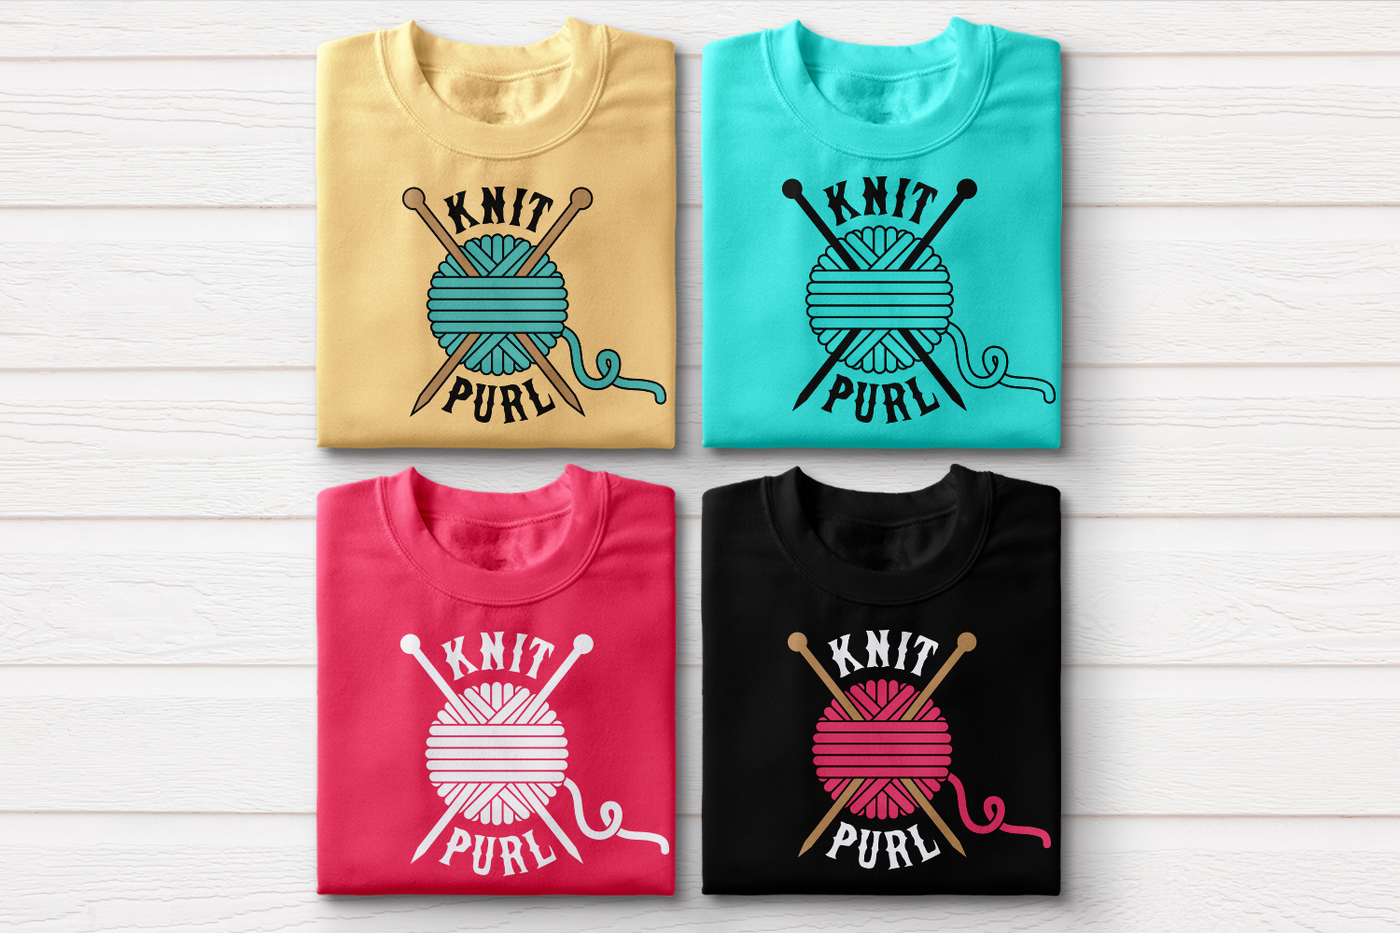 Four folded sweatshirts. Each has a ball of yarn with knitting needs in it and the word "Knit" above and "Purl" below.